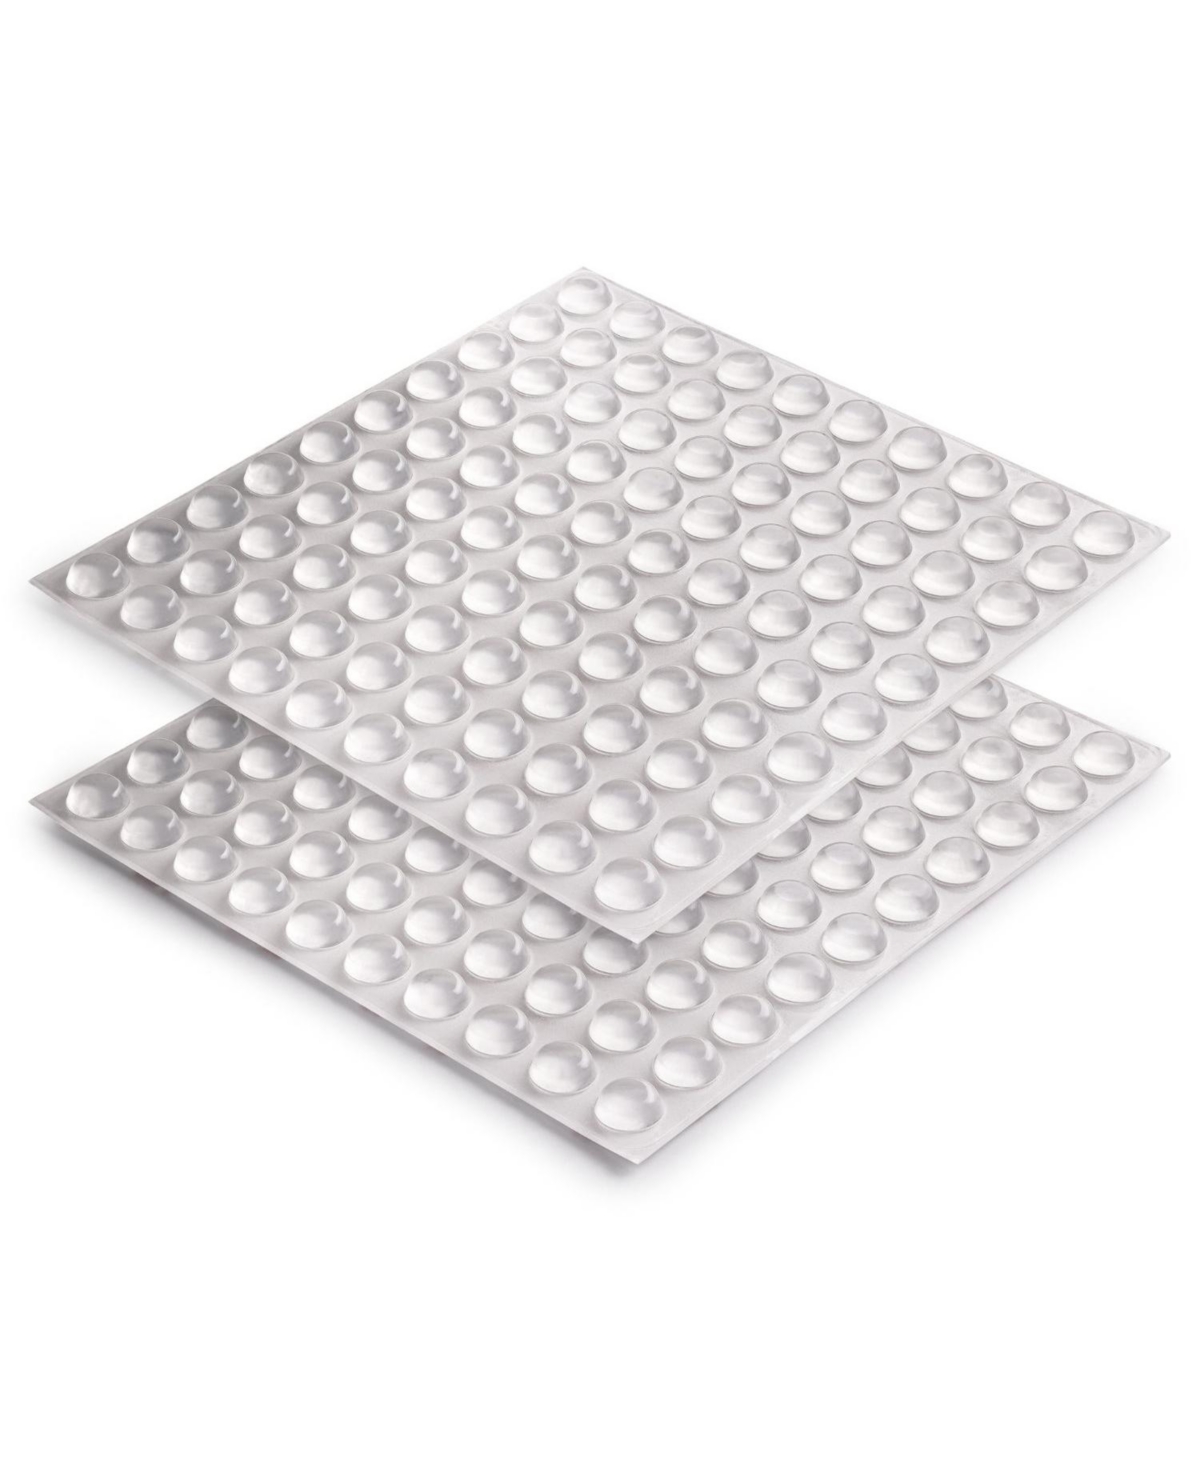 Cabinet Bumpers Clear Adhesive Pads 200-Pc.